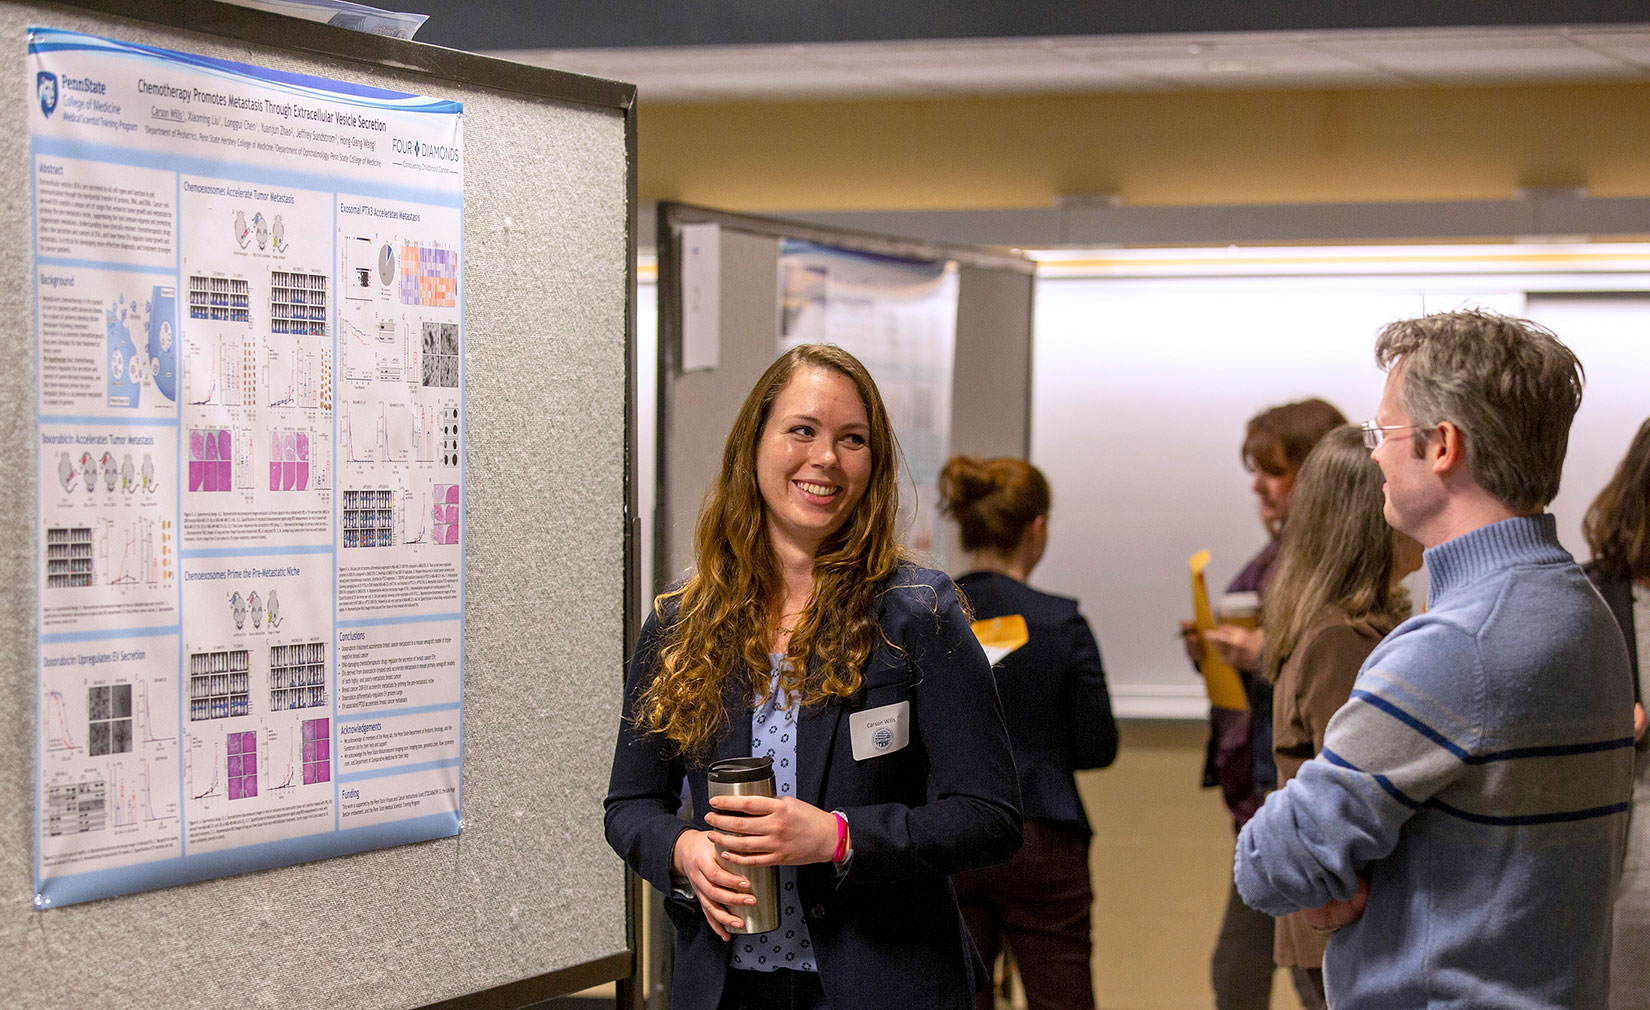 A woman stands near an academic poster, talking and smiling to another person.